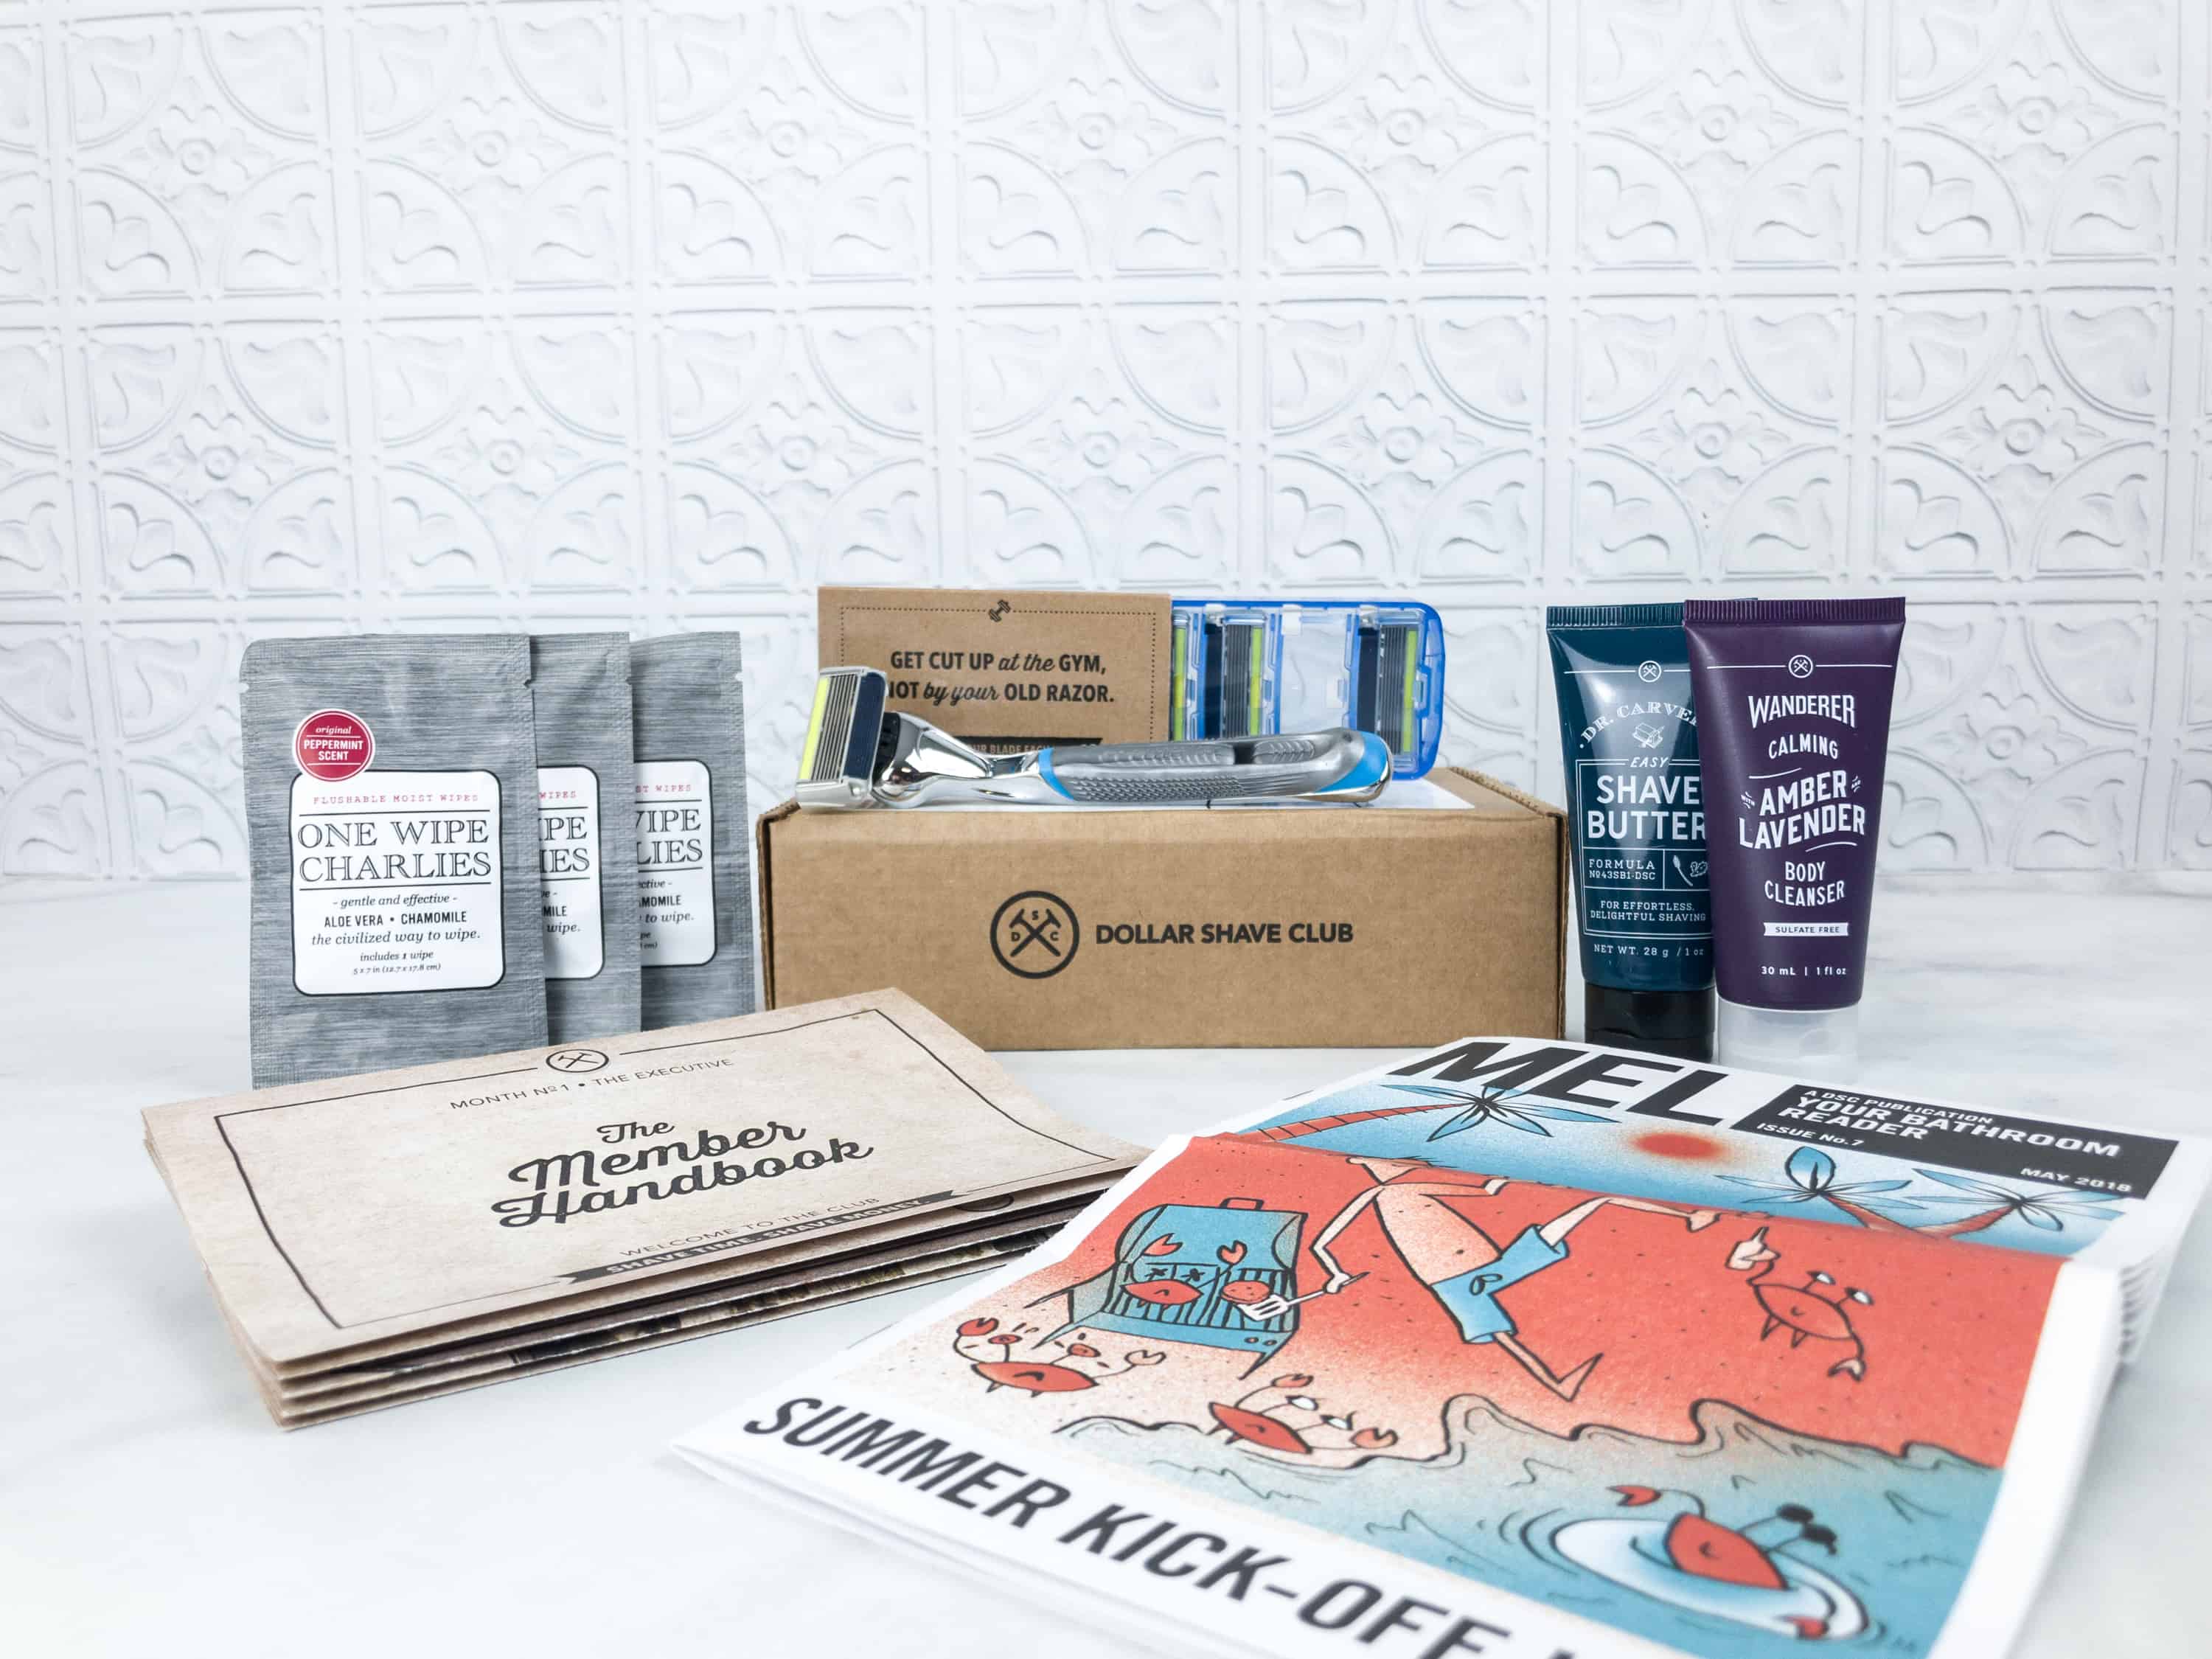 https://hellosubscription.com/wp-content/uploads/2018/04/28015641/dollar-shave-club-trial-offer-16.jpg?quality=90&strip=all